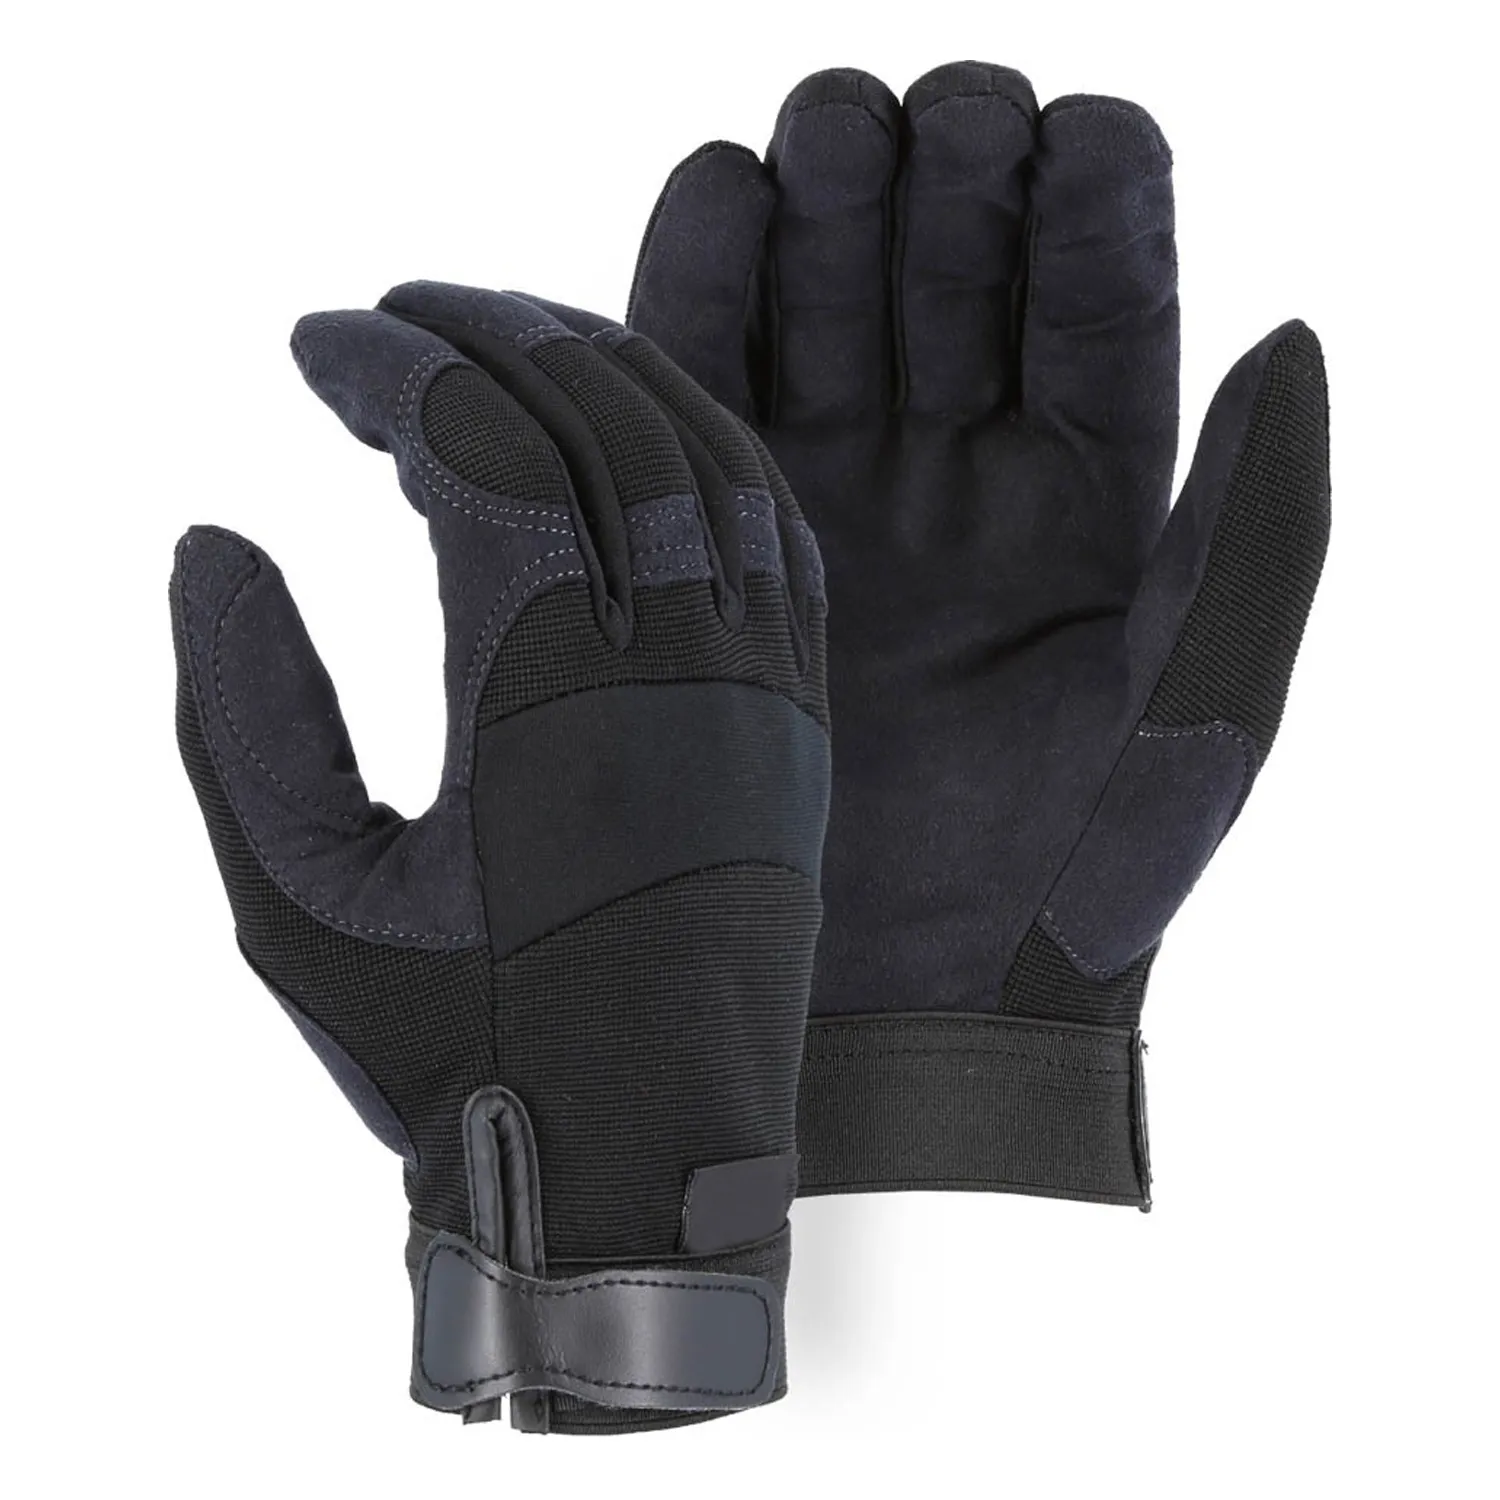 Industrial Anti Vibration Cut Resistant Synthetic Leather Mechanical Gloves High Performance Safety Hand Protection Gloves